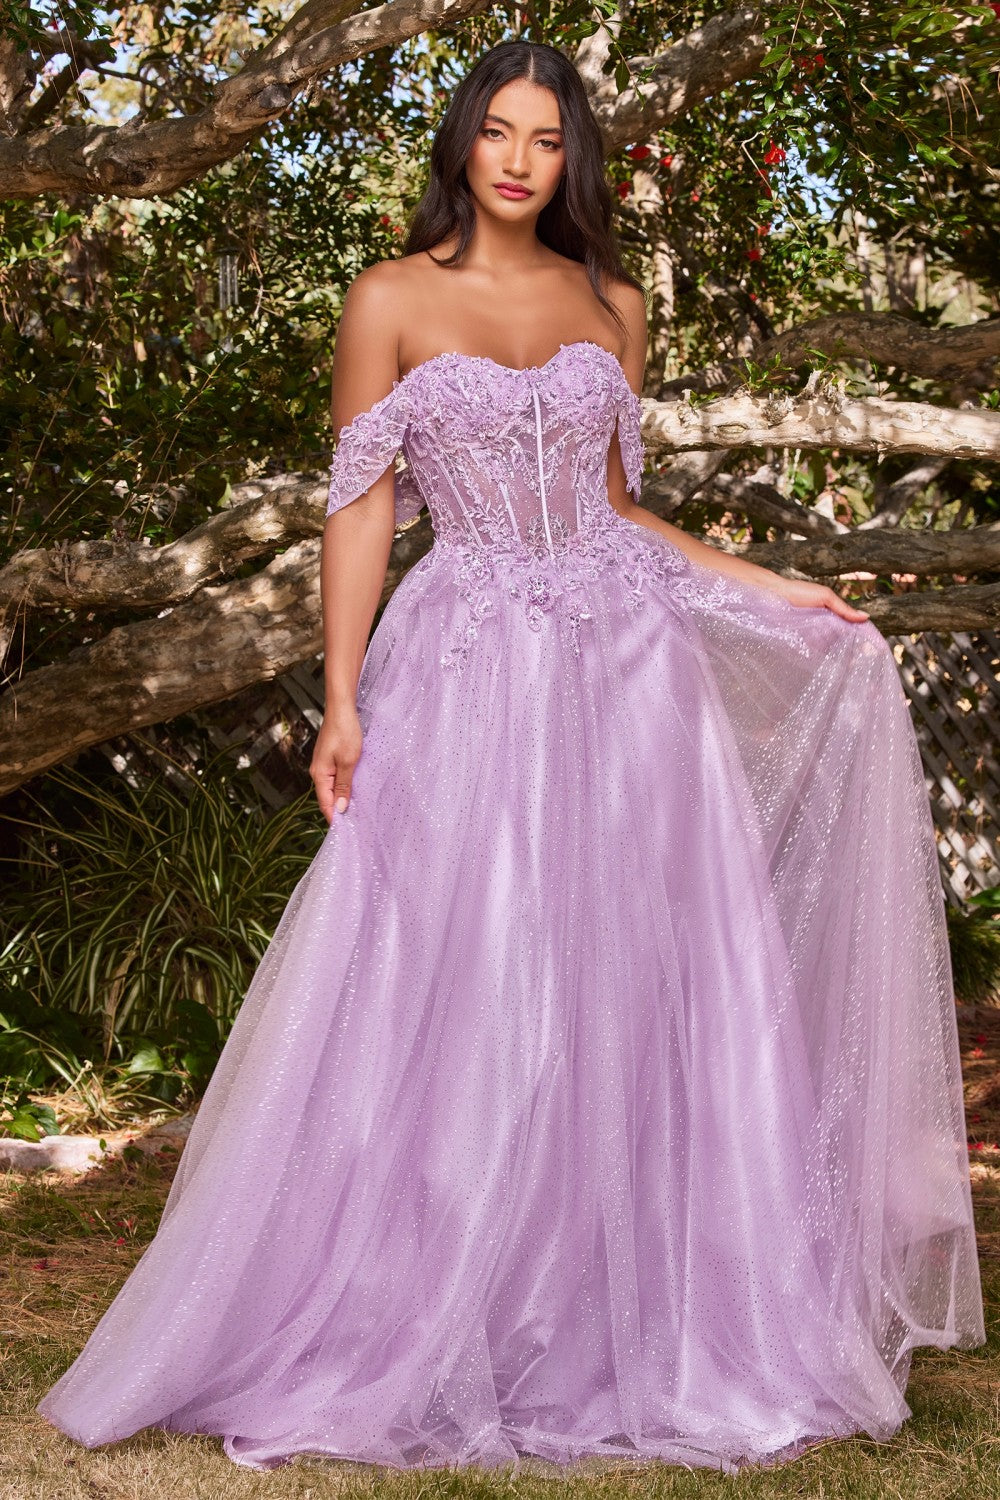 Lavender Lace A-line Corset Slit Gown - Women Evening Formal Gown CD0198 - Special Occasion